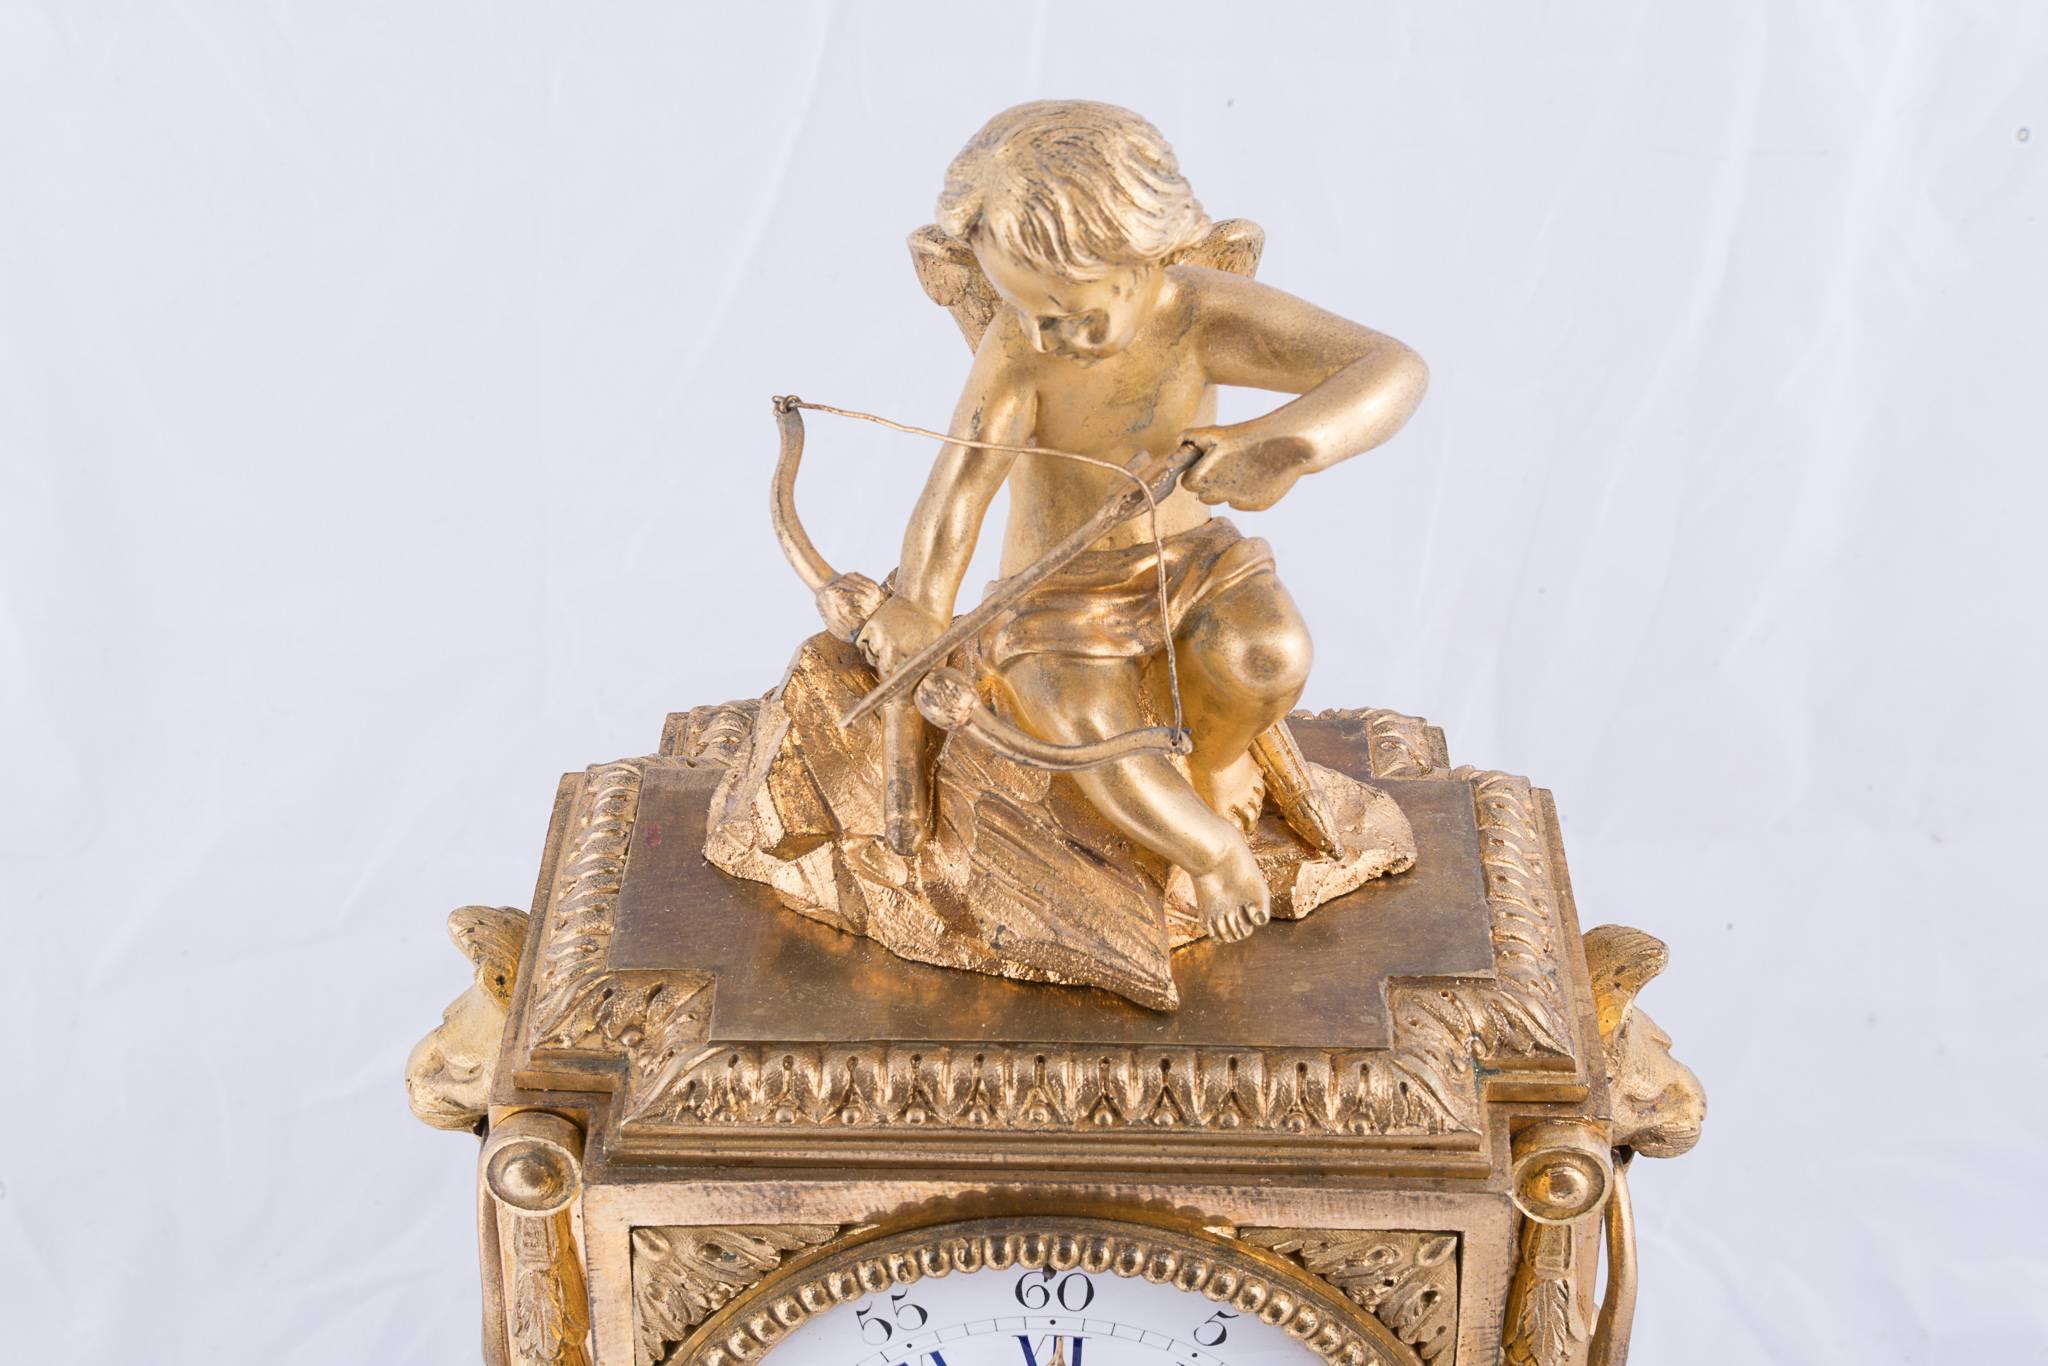 A beautifully detailed 19th century bronze dore clock with the figure of cupid on the top.